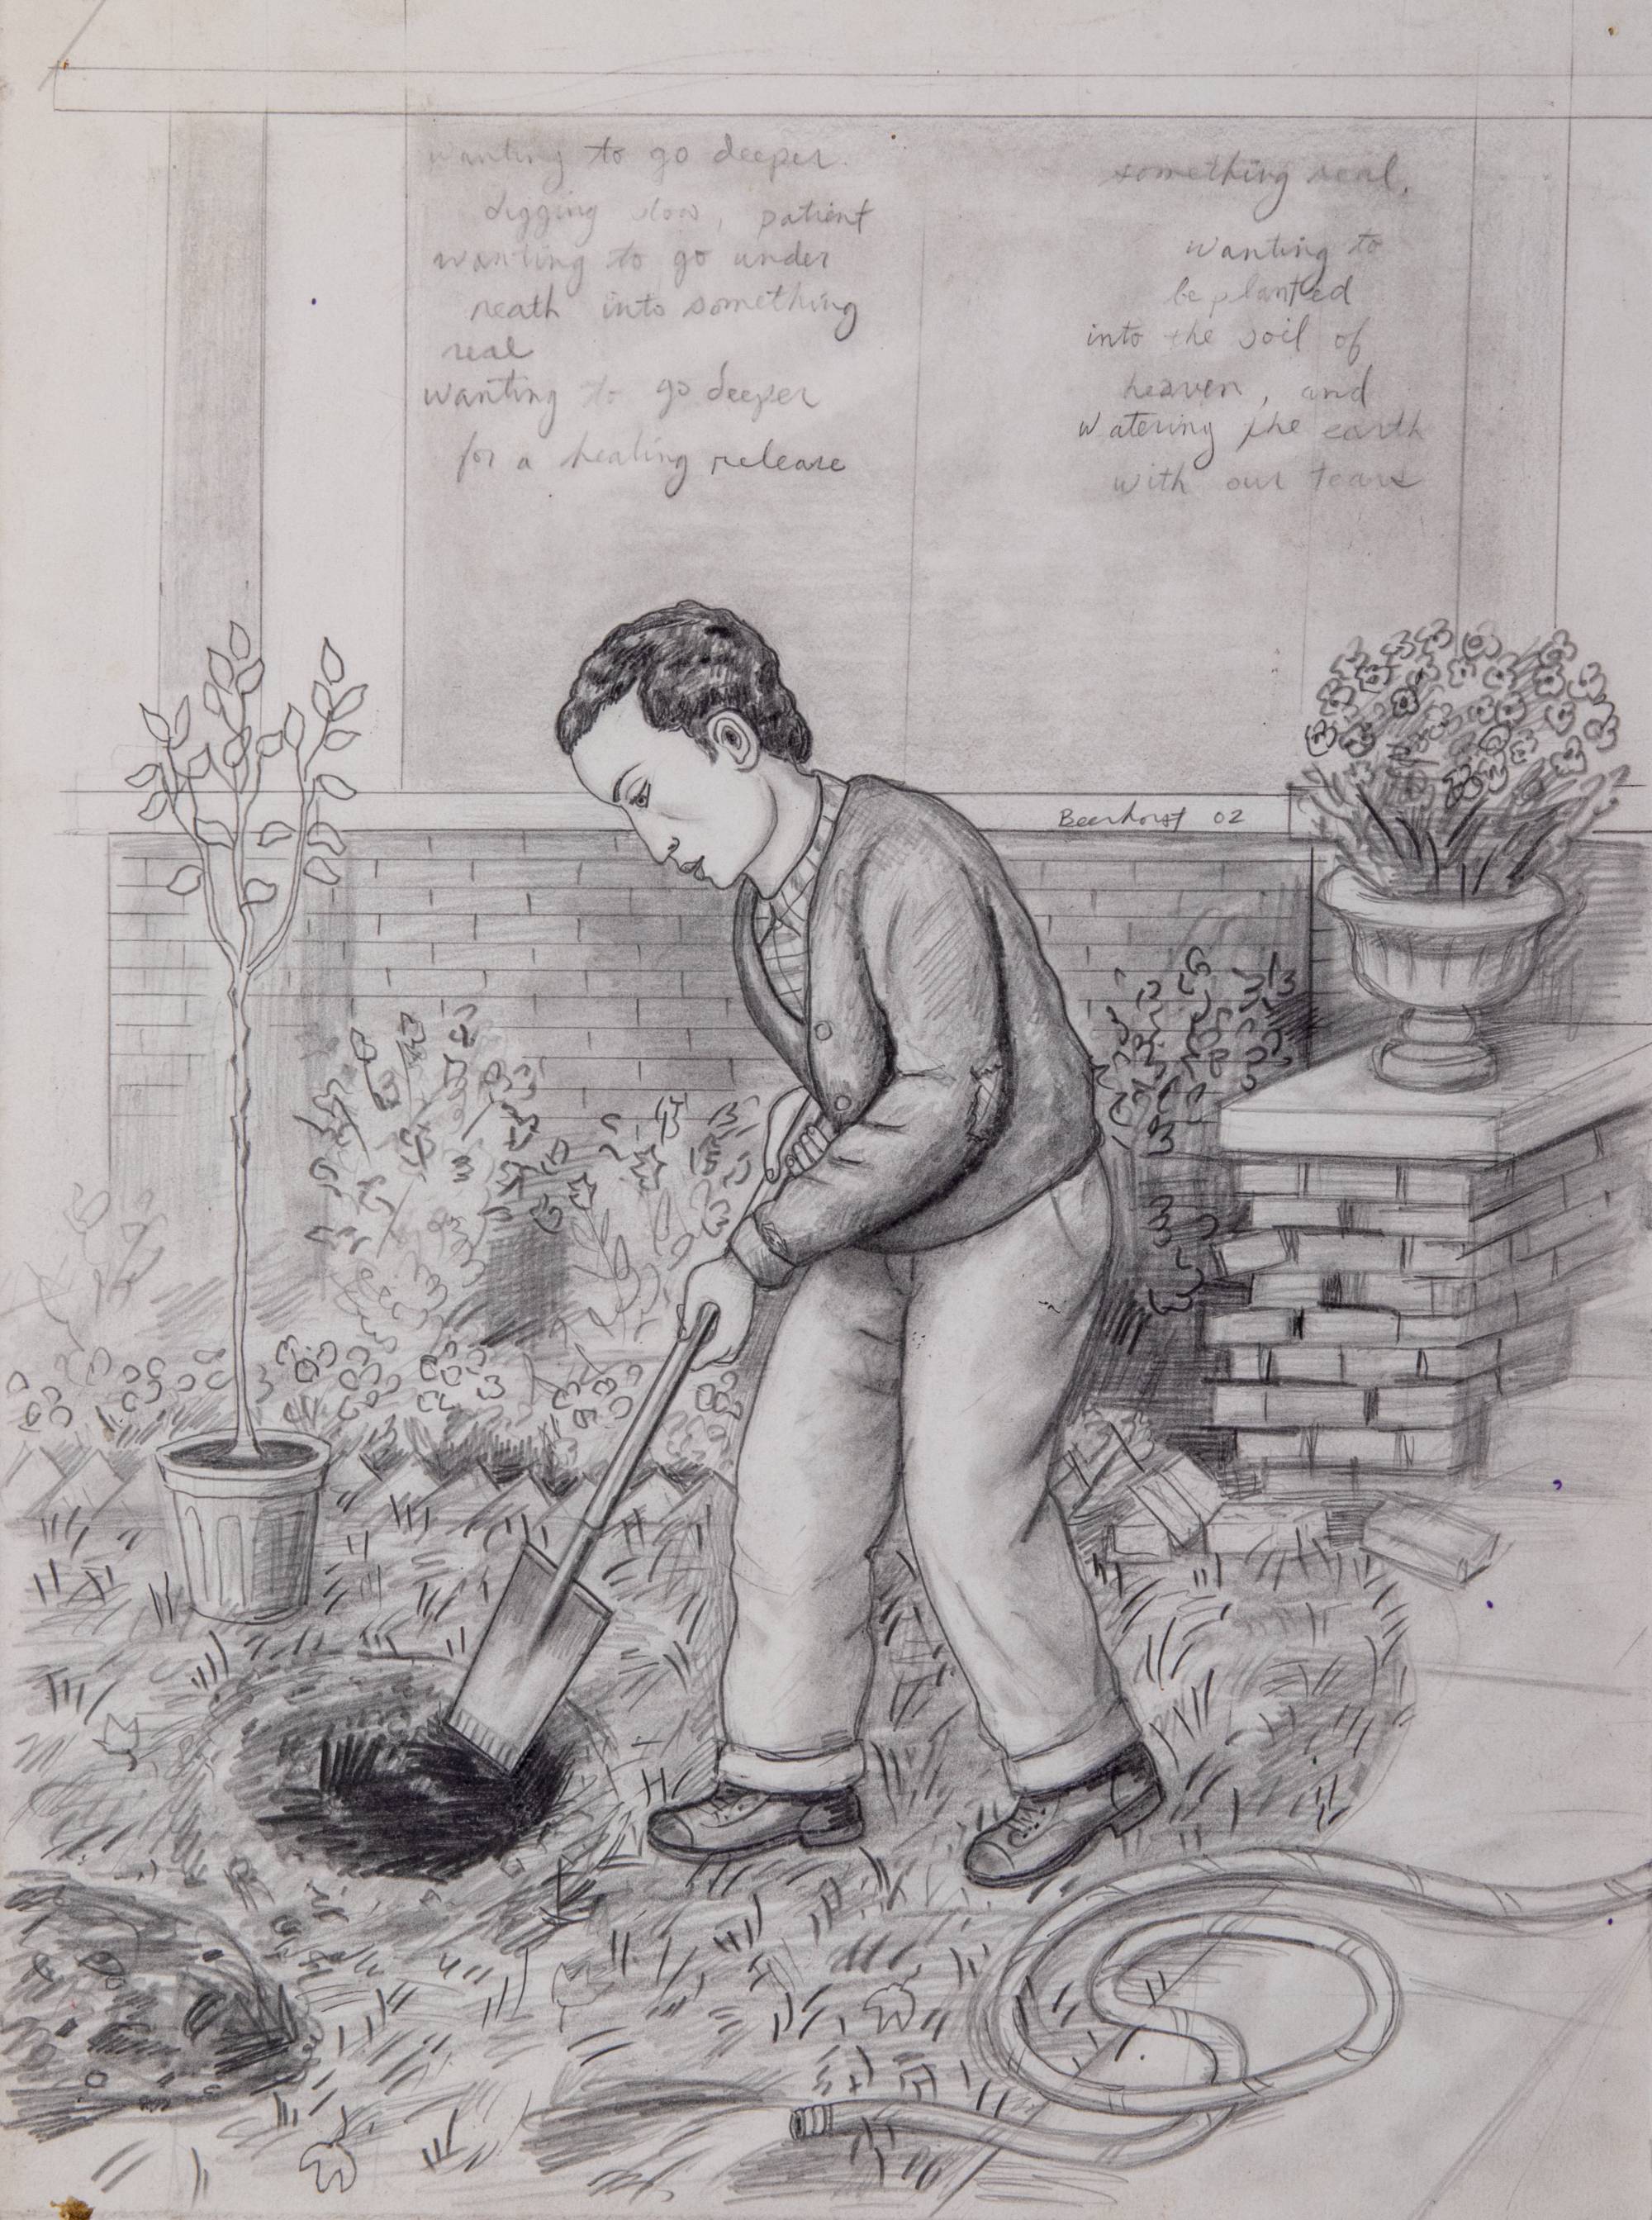 graphite drawing of man digging hole with shovel in front of house